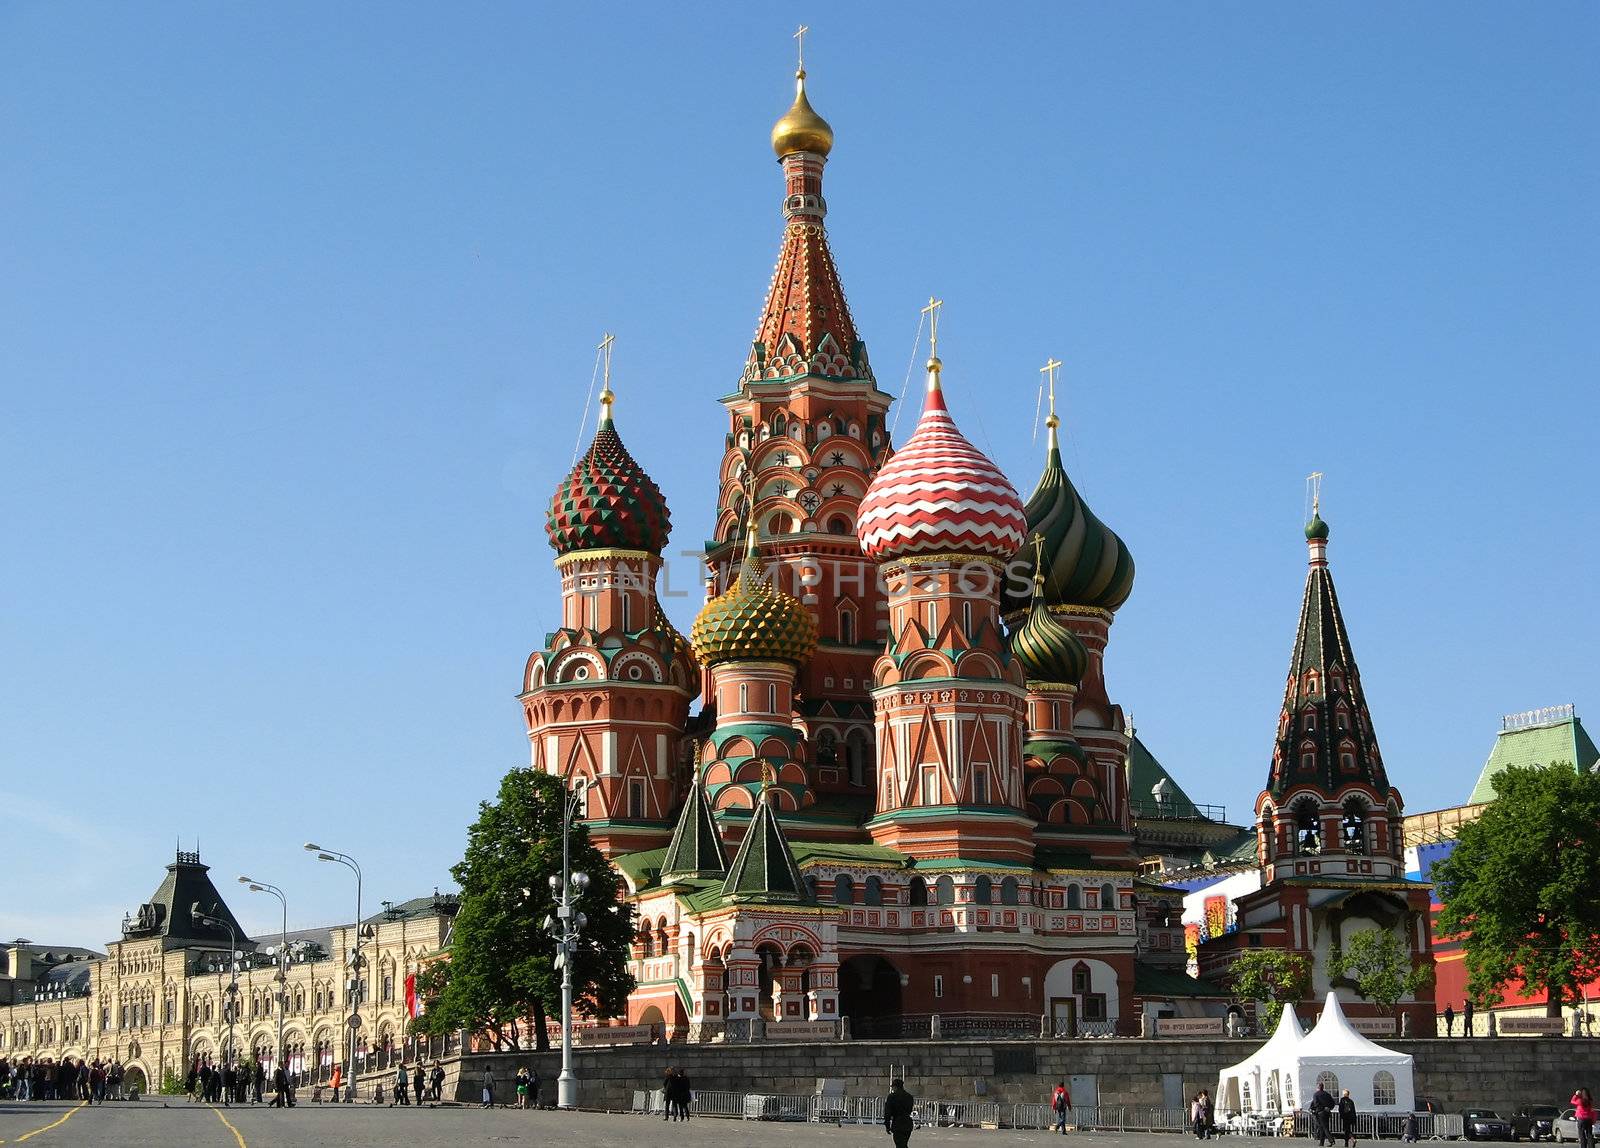 St Basil's Cathedral, Moscow, Russia